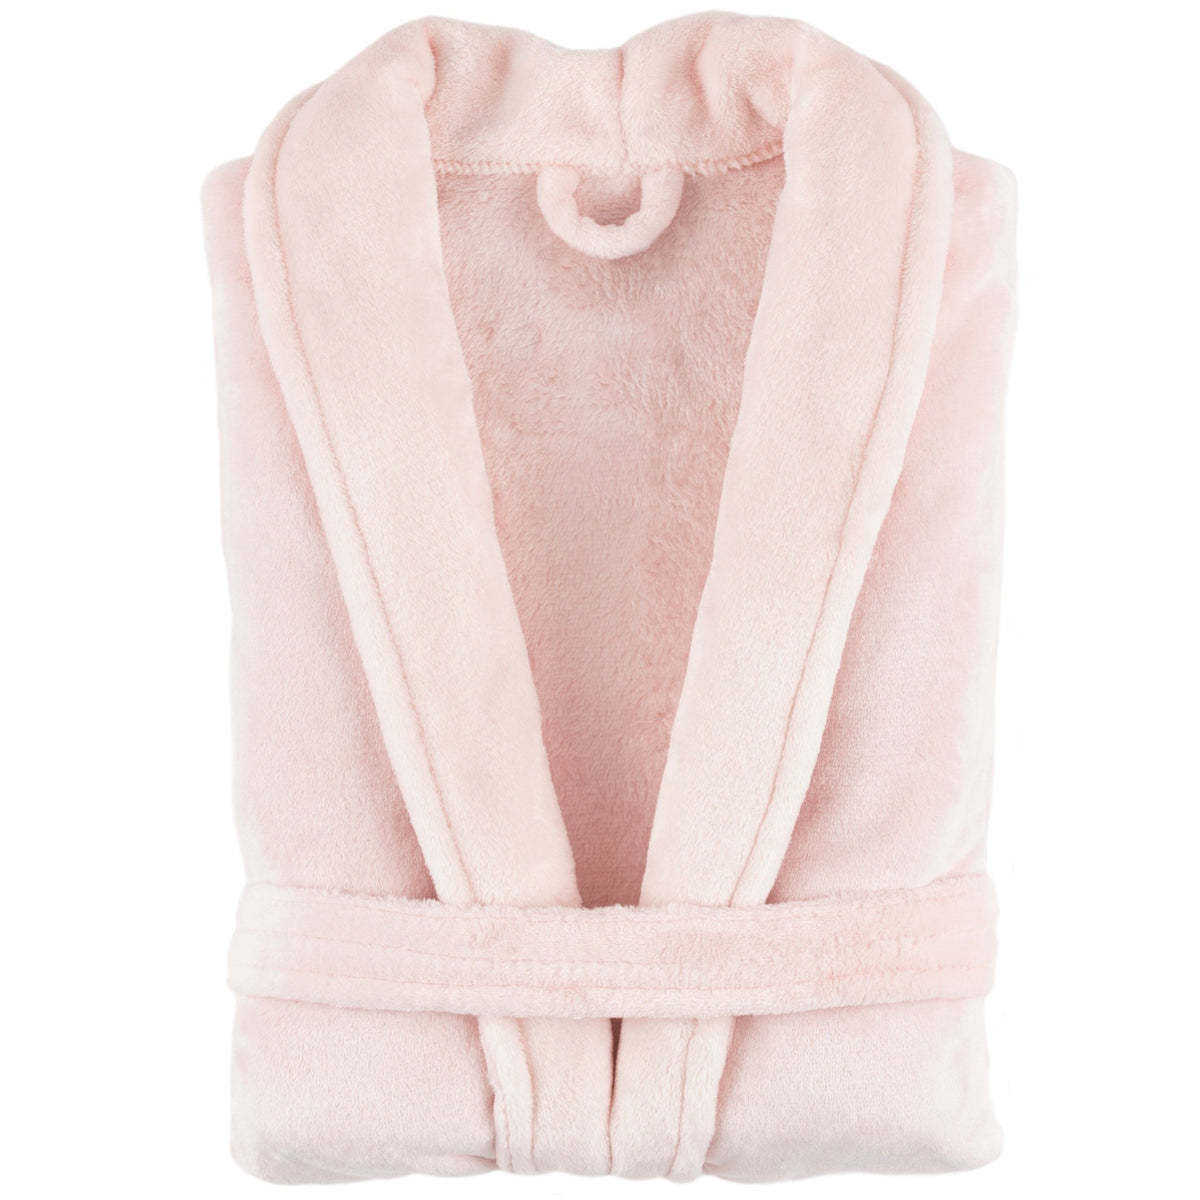 Folded Image of Pine Cone Hill Sheepy Fleece 2.0 Robe in Color Pale Rose